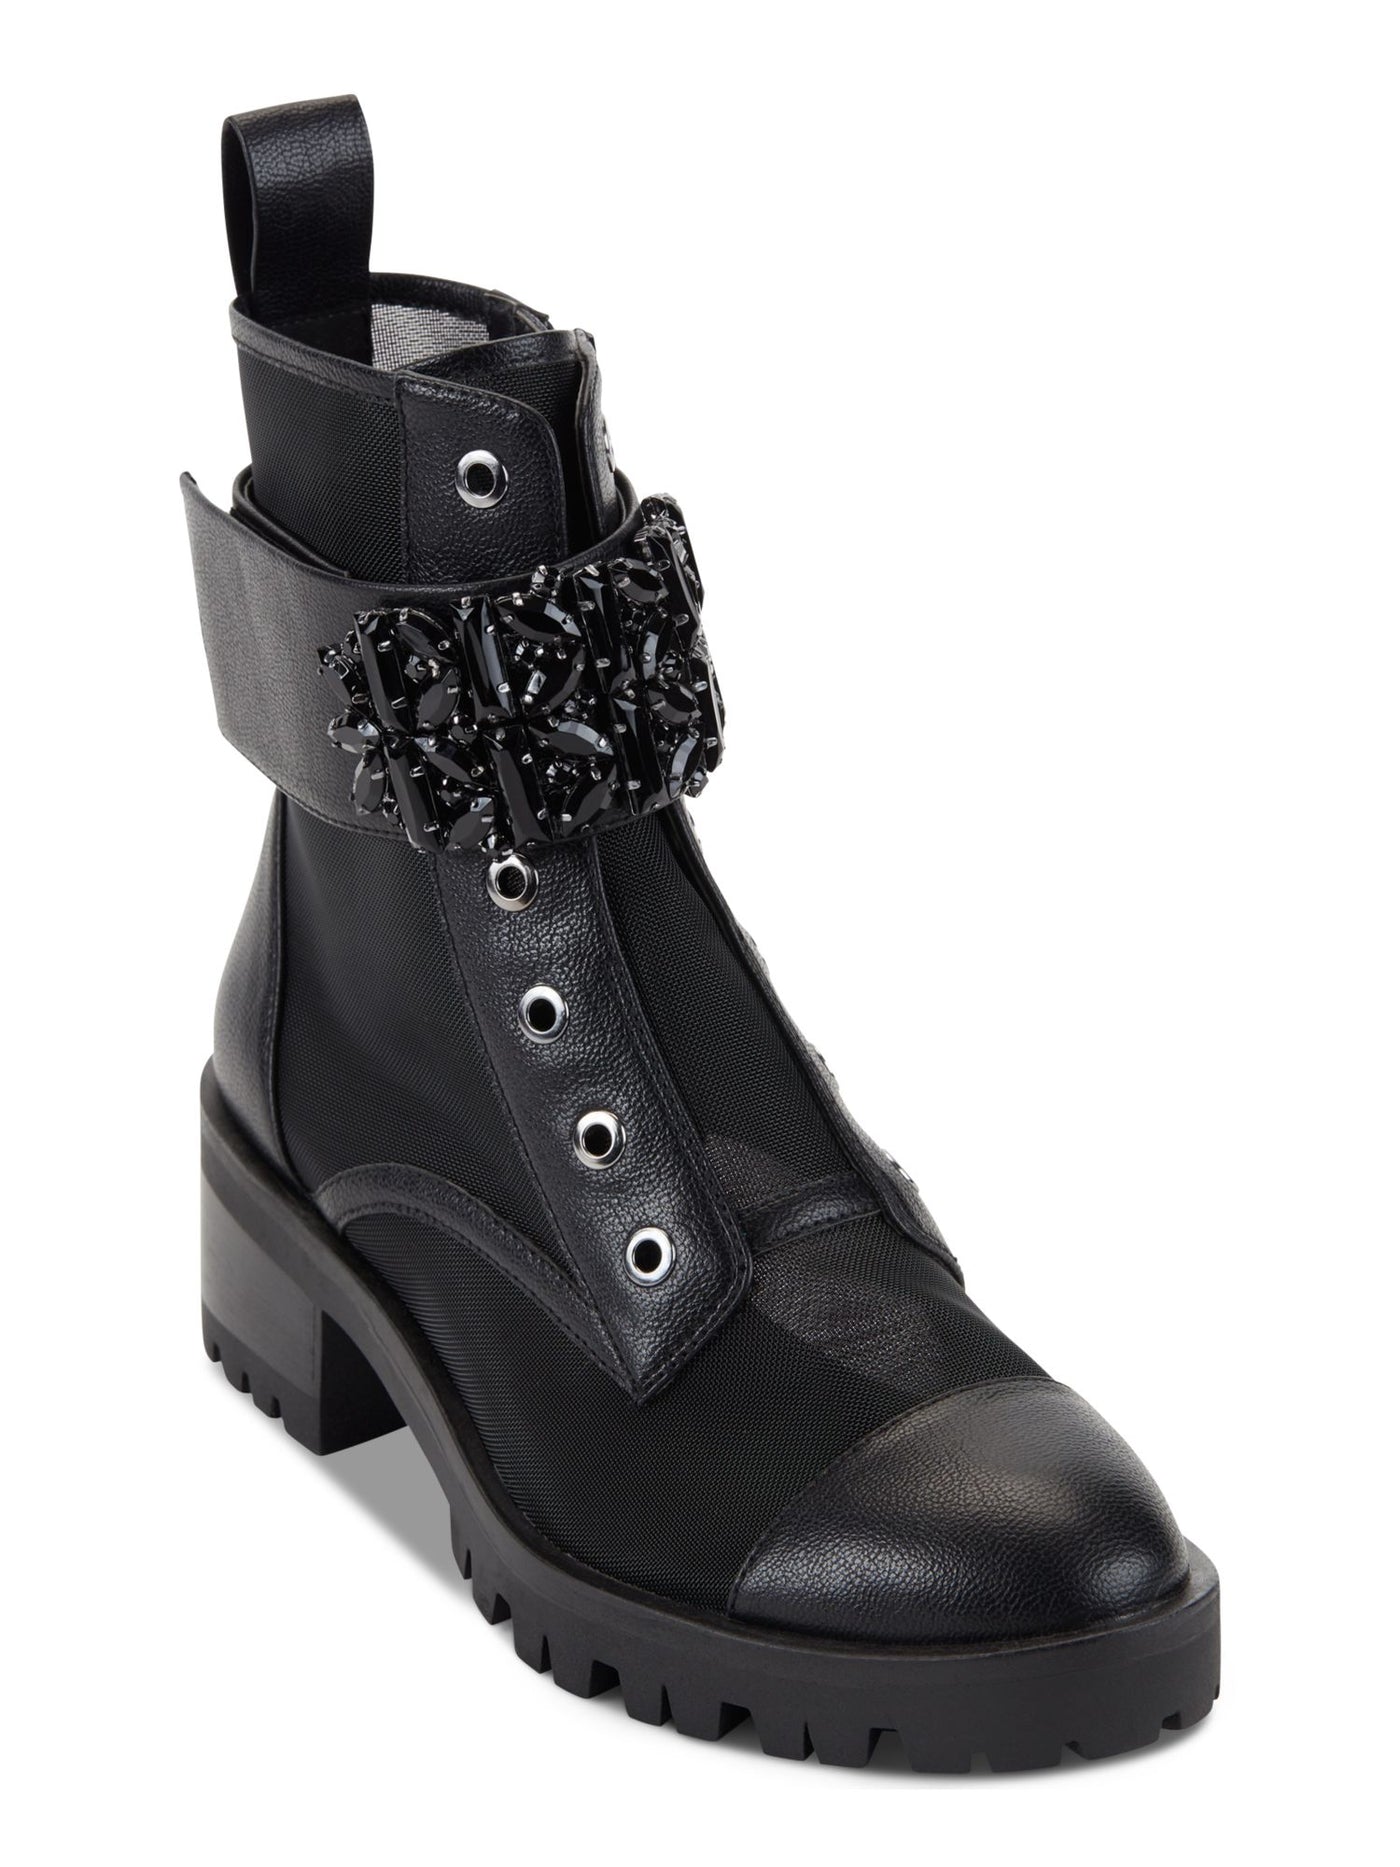 KARL LAGERFELD PARIS Womens Black Embellished Ankle Strap Eyelets Lug Sole Cushioned Pippa Round Toe Block Heel Zip-Up Leather Combat Boots 8.5 M